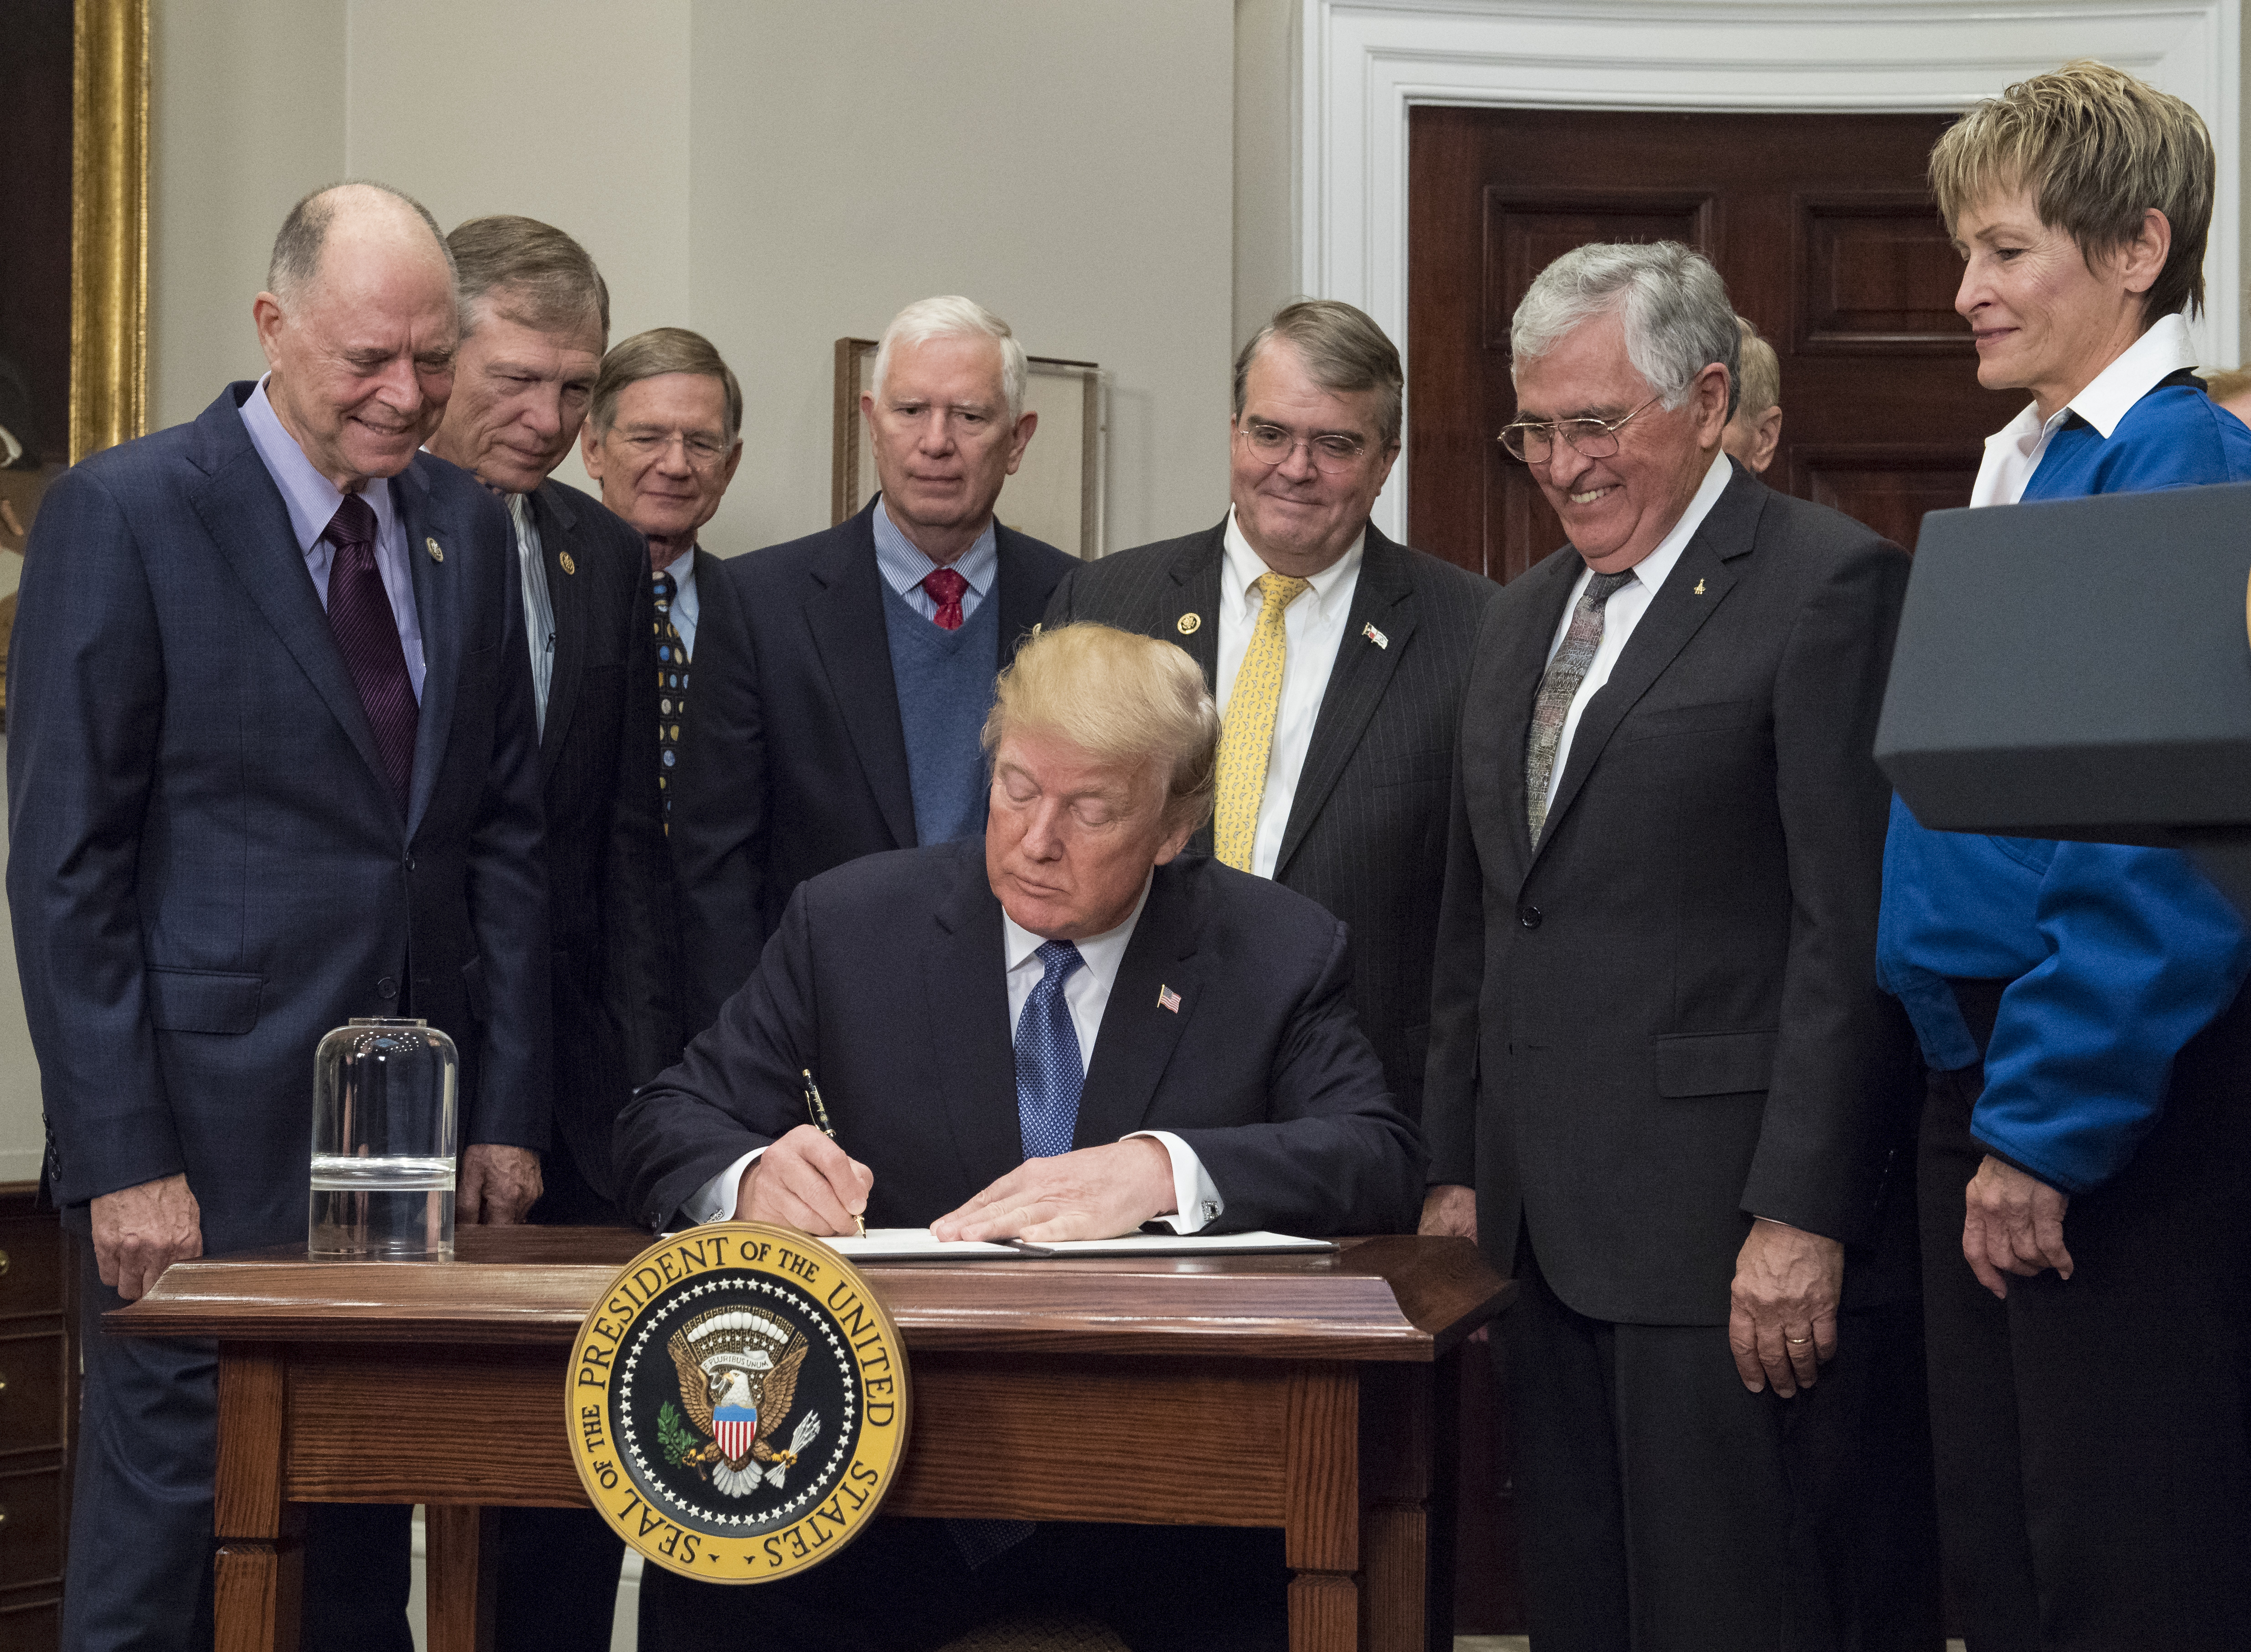 President Trump signs Space Policy Directive 1 surrounded almost entirely by men in 2017